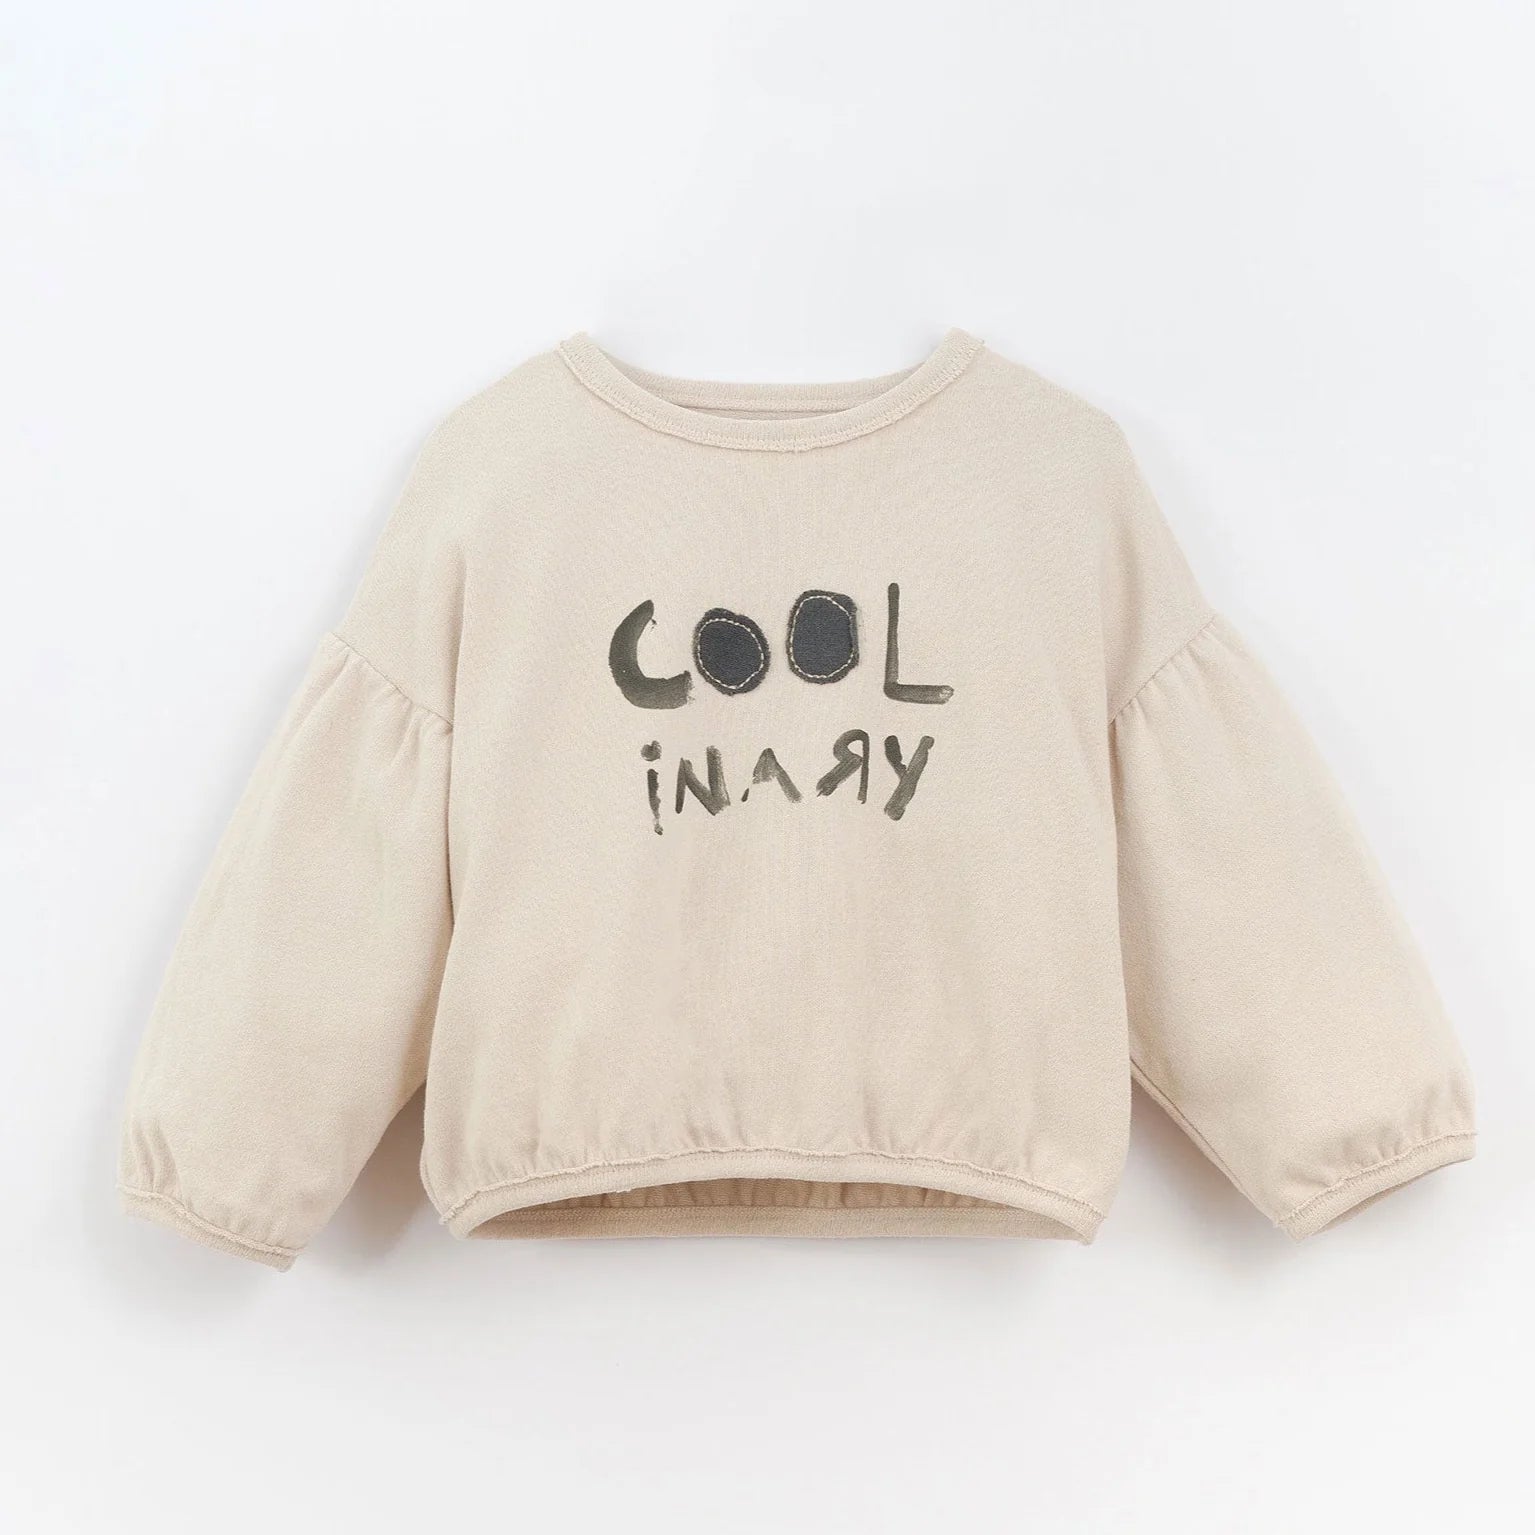 PLAY UP SWEATSHIRT mit Cool inary Print oat